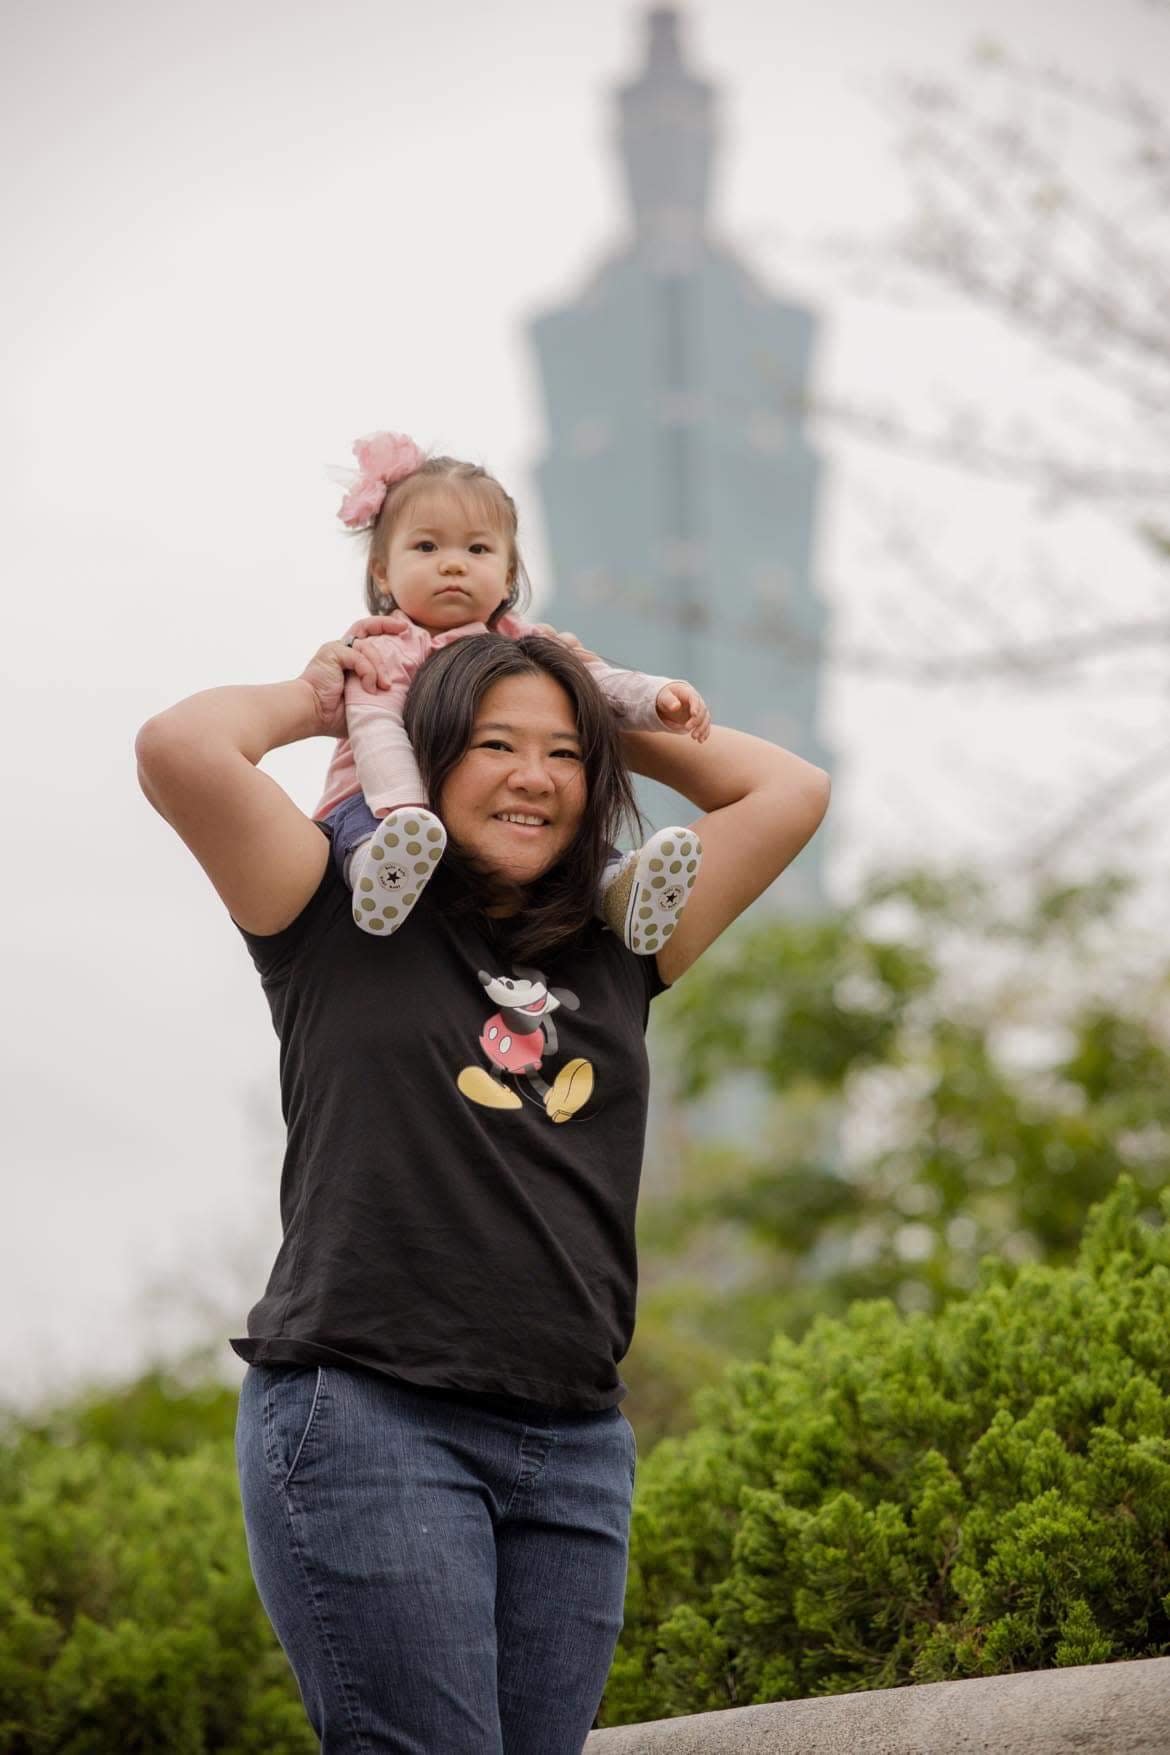 Leann Luong, from Bremerton, shown carrying her daughter, works at the American Institute of Taiwan as a Navy Programs Officer. She provides management support for the Taiwan Navy and Marine Corps and serves as a principal interface between Taiwan Navy and Marine Corps and the U.S. Navy and Marine Corps.